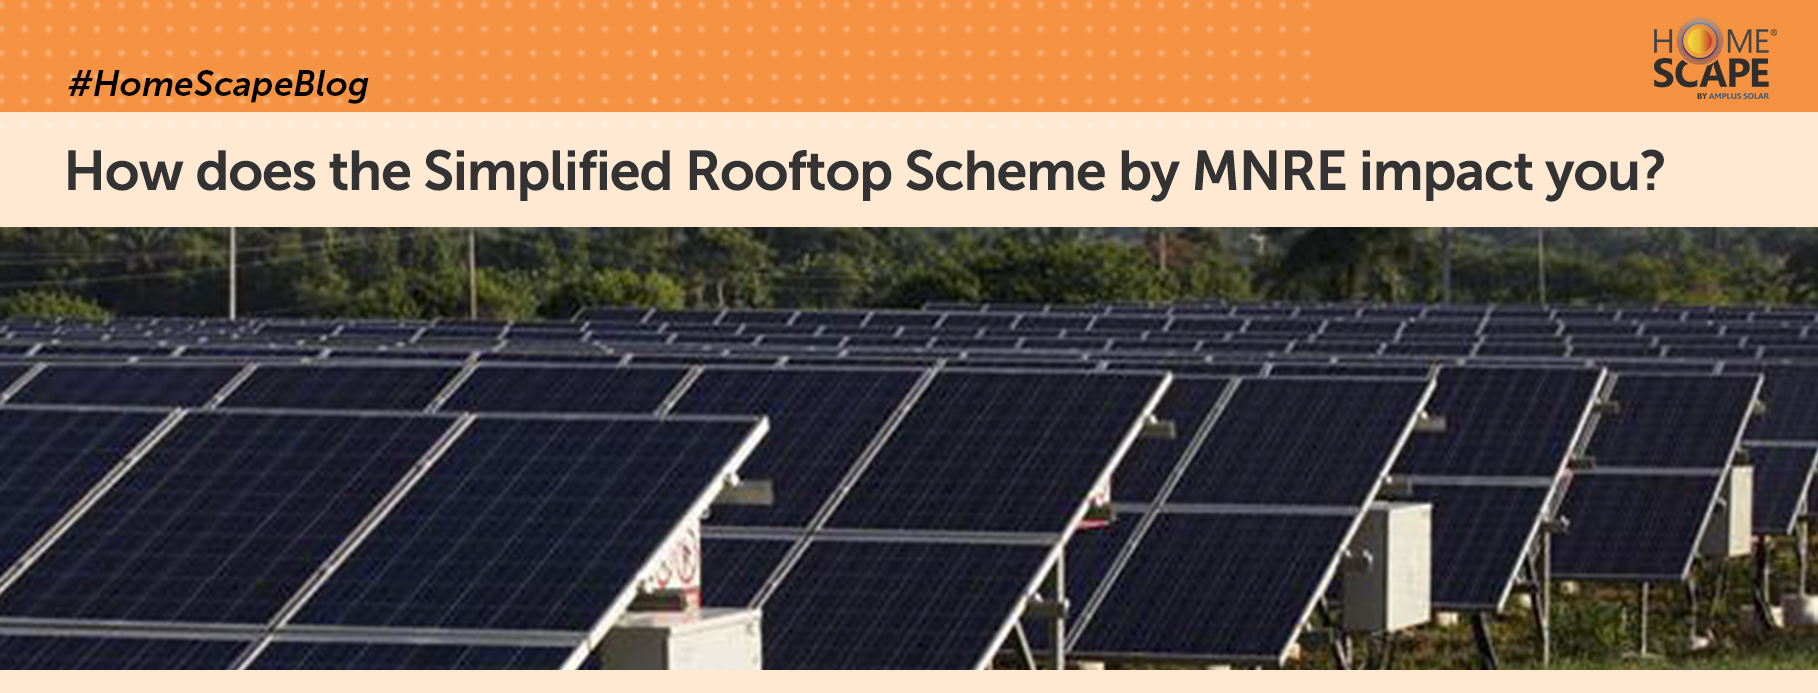 How does the Simplified Rooftop Scheme by MNRE impact you